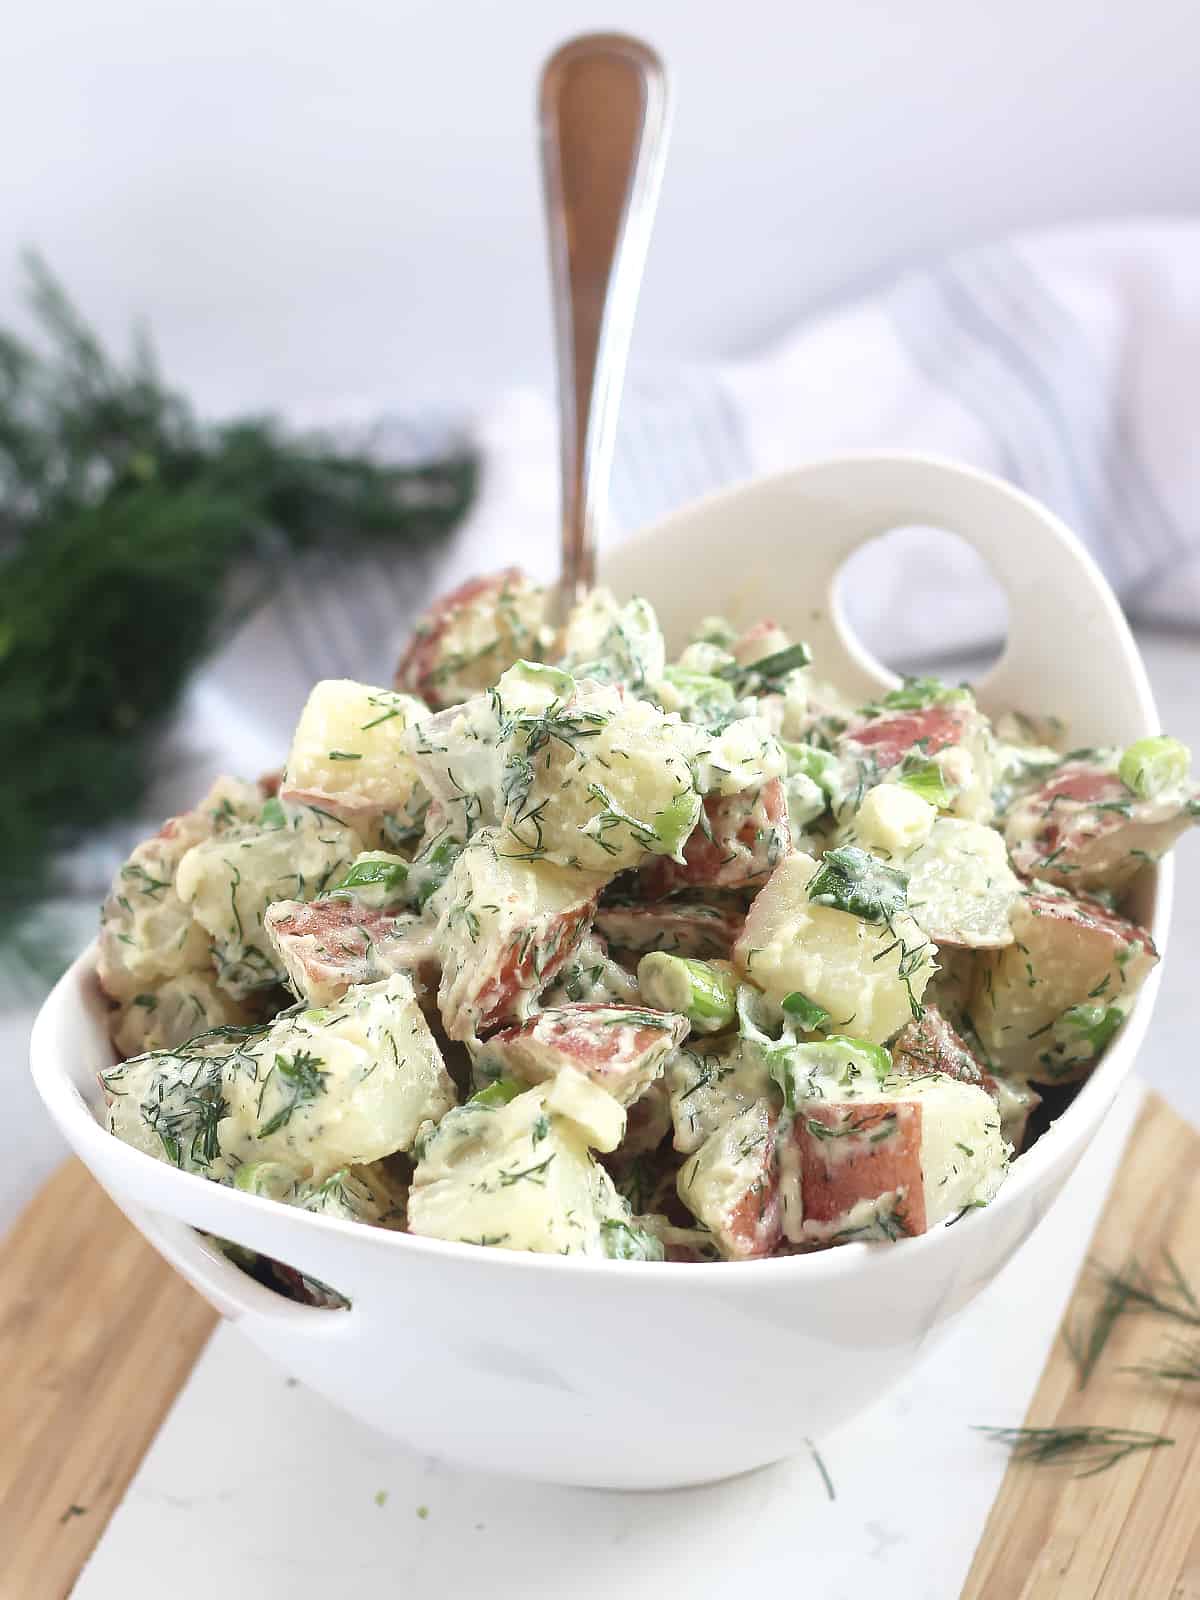 Red skinned potatoes tossed in a creamy dill dressing and served in a white bowl.